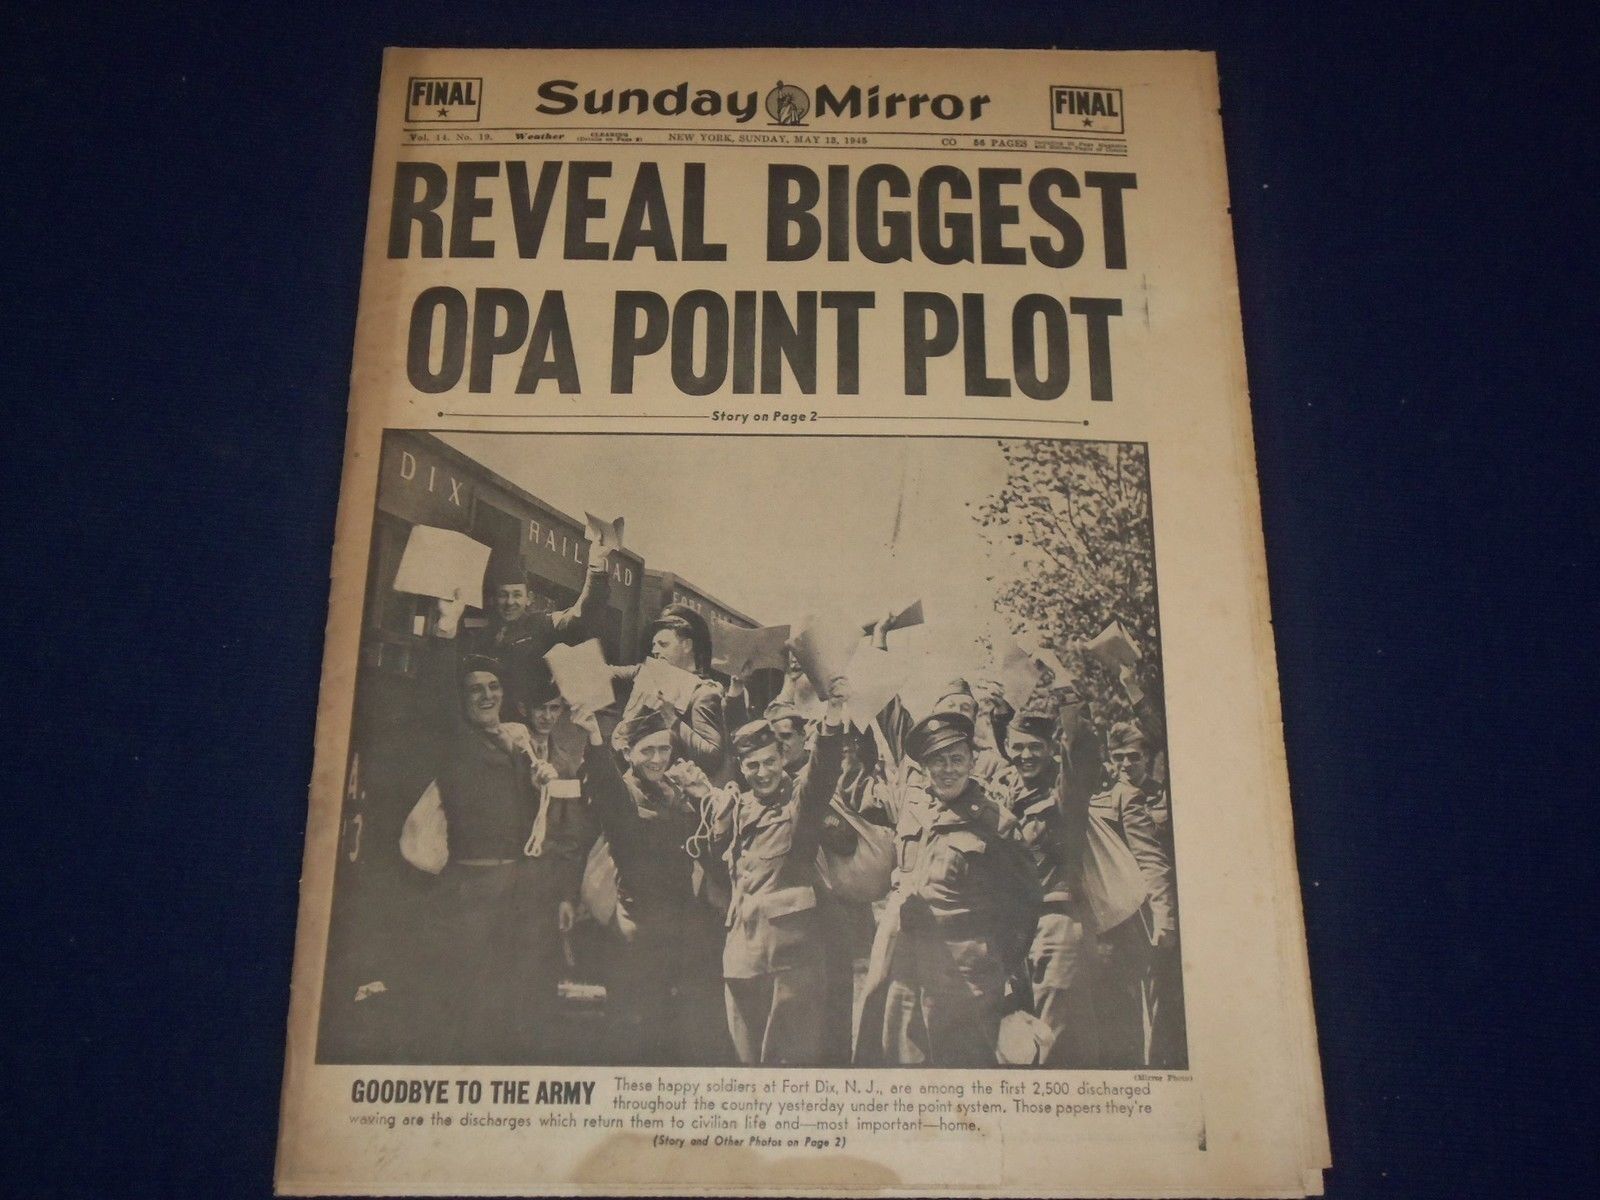 1945 MAY 13 NEW YORK SUNDAY MIRROR - REVEAL BIGGEST OPA POINT PLOT - NP 1796